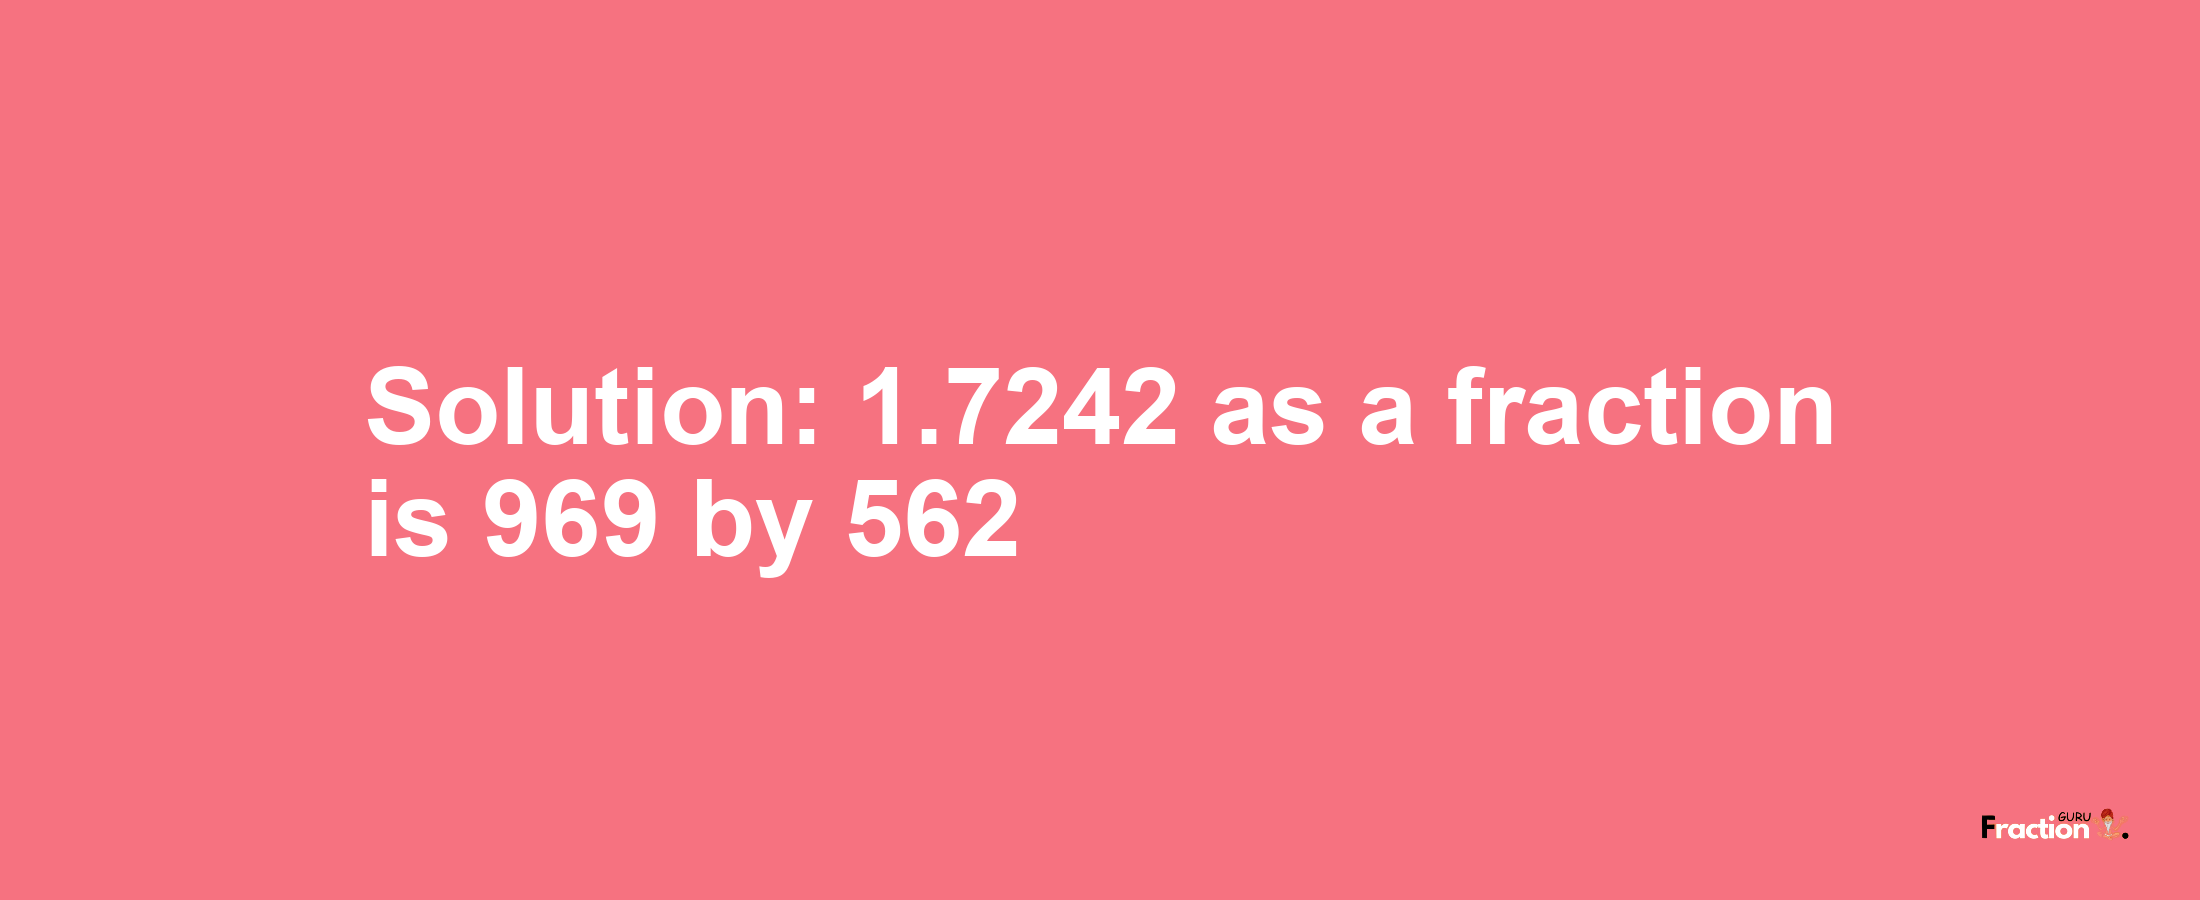 Solution:1.7242 as a fraction is 969/562